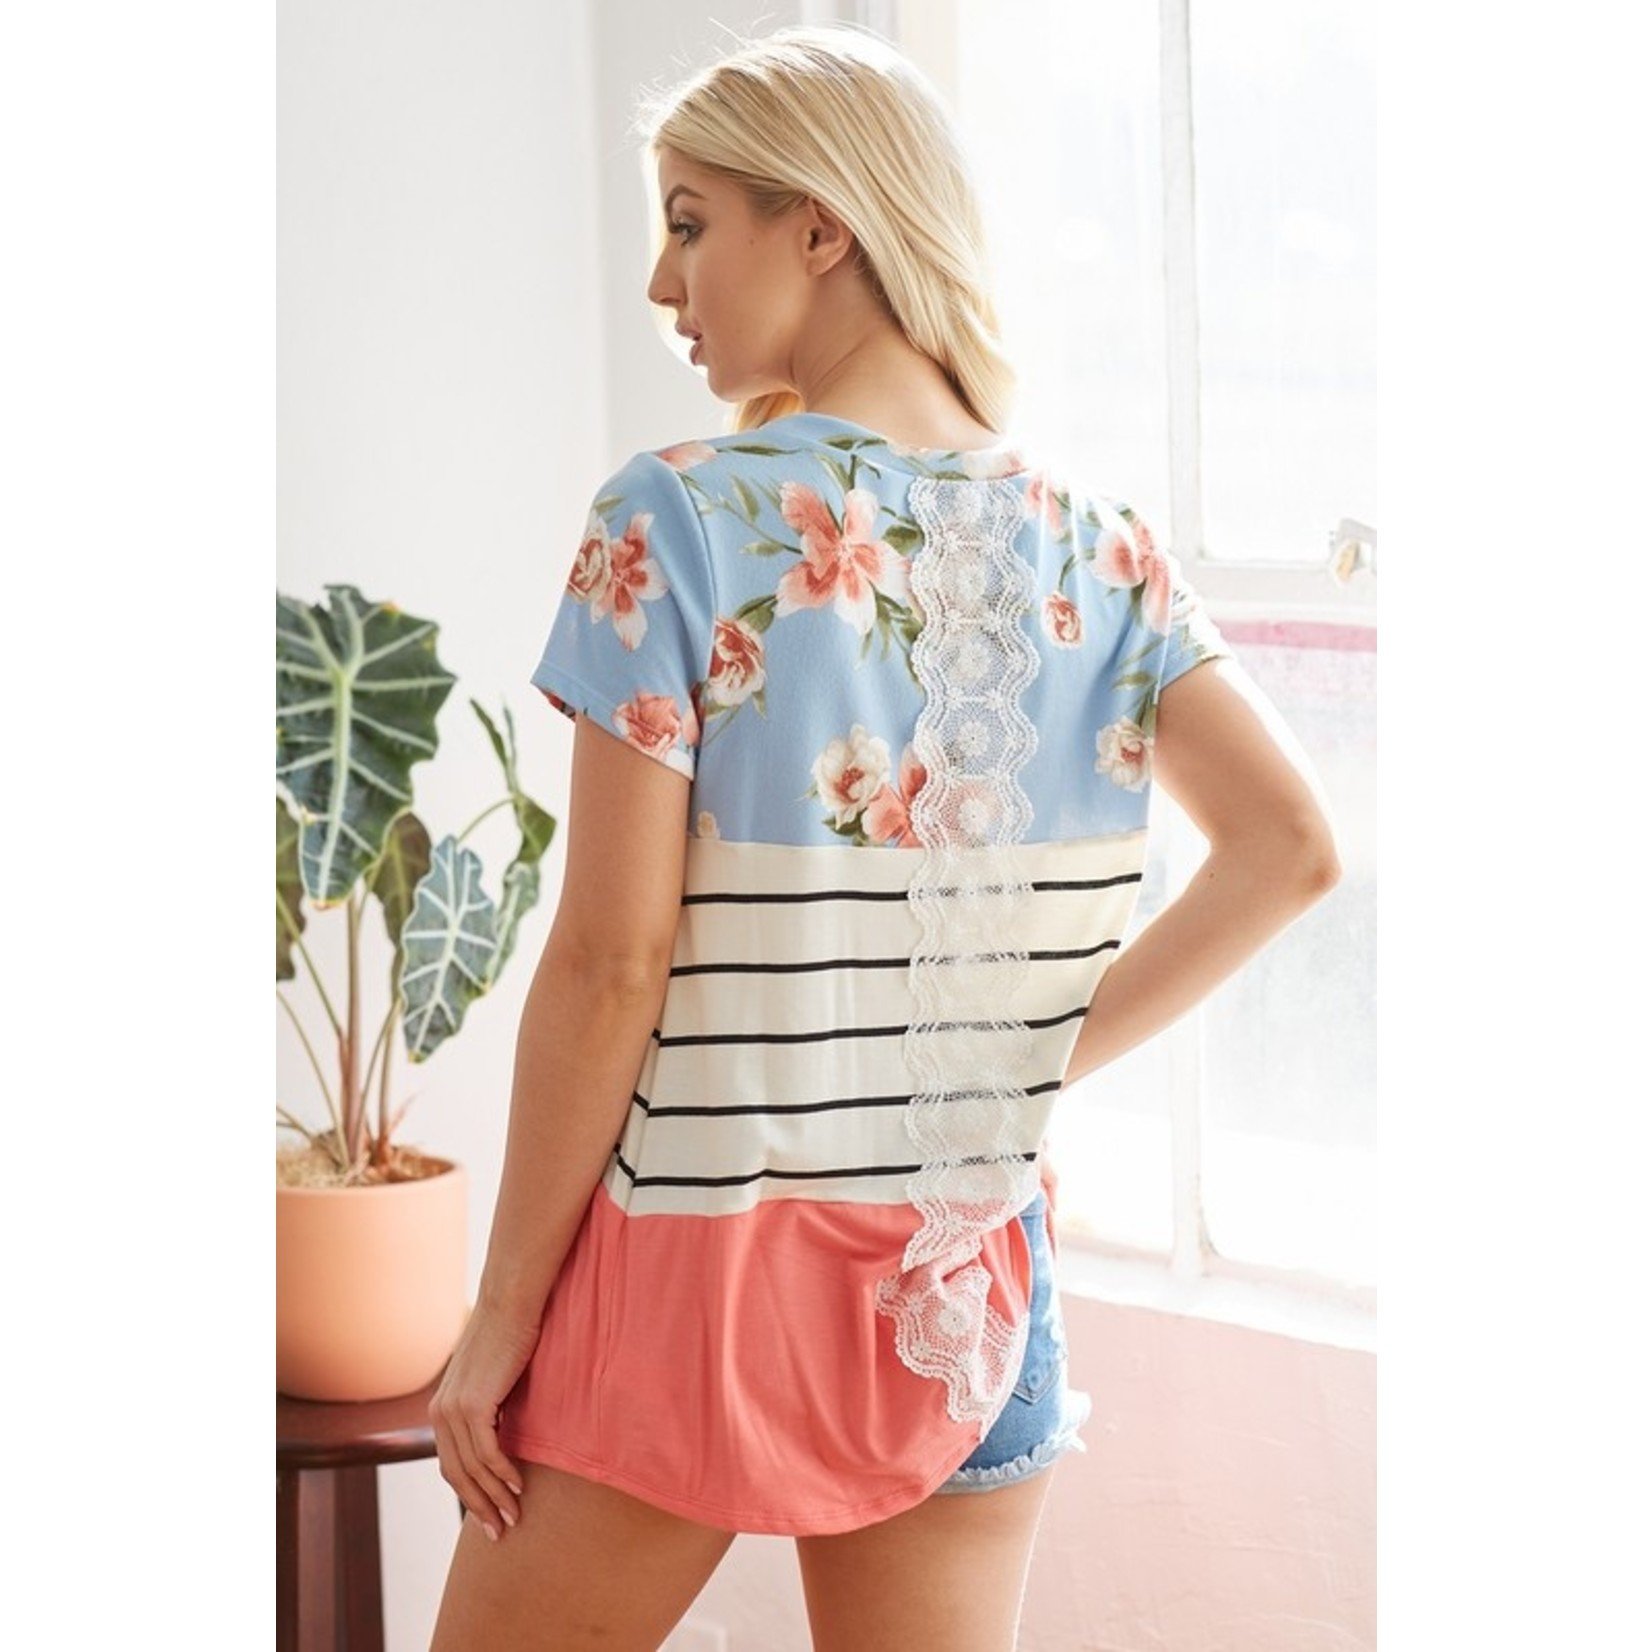 Lovely Melody Floral/Stripe Color Block Short Sleeve Top with Lace Detail on back